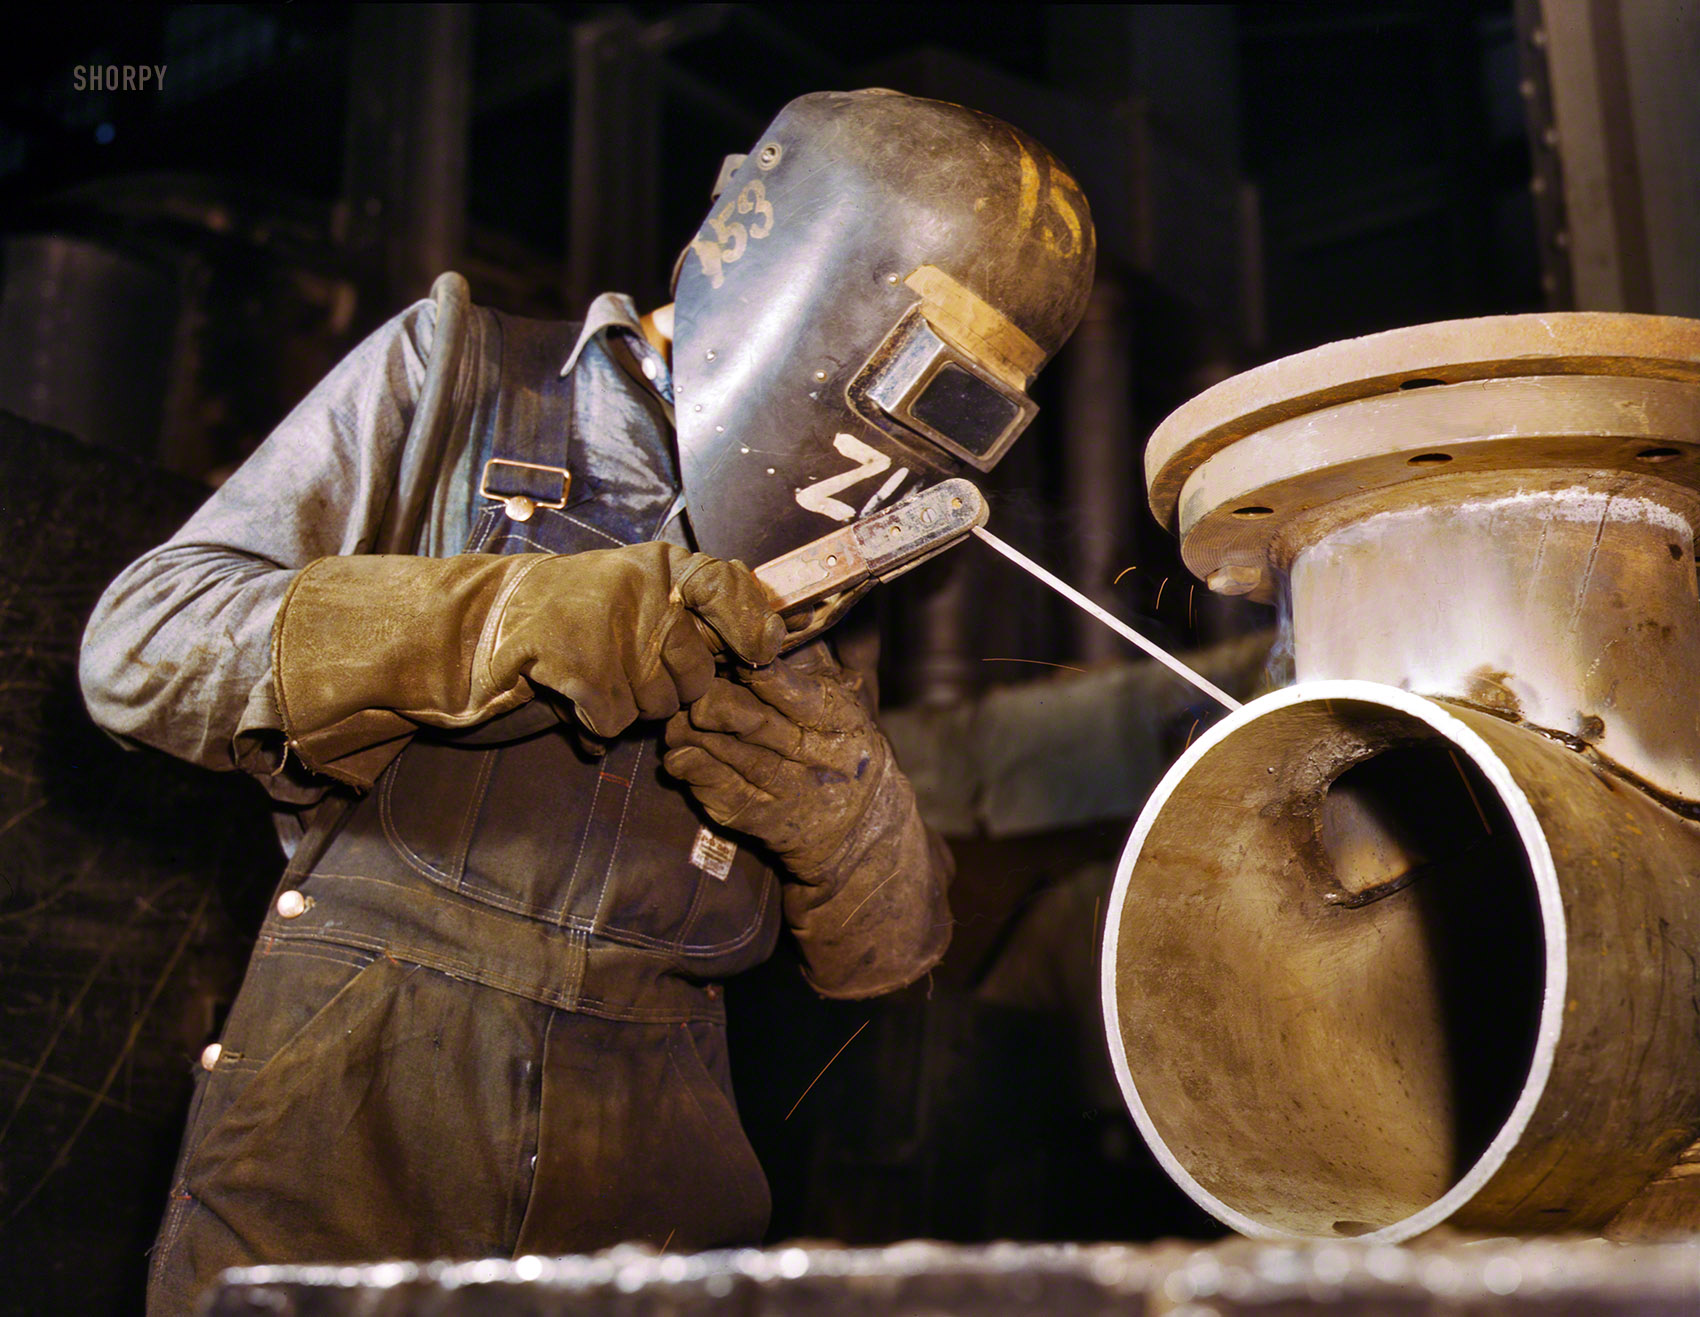 June 1942. "Combustion Engineering Co., Chattanooga, Tennessee. Welder making boilers for a ship." A definite 1950s sci-fi vibe here. 4x5 Kodachrome transparency by Alfred Palmer, Office of War Information. View full size.